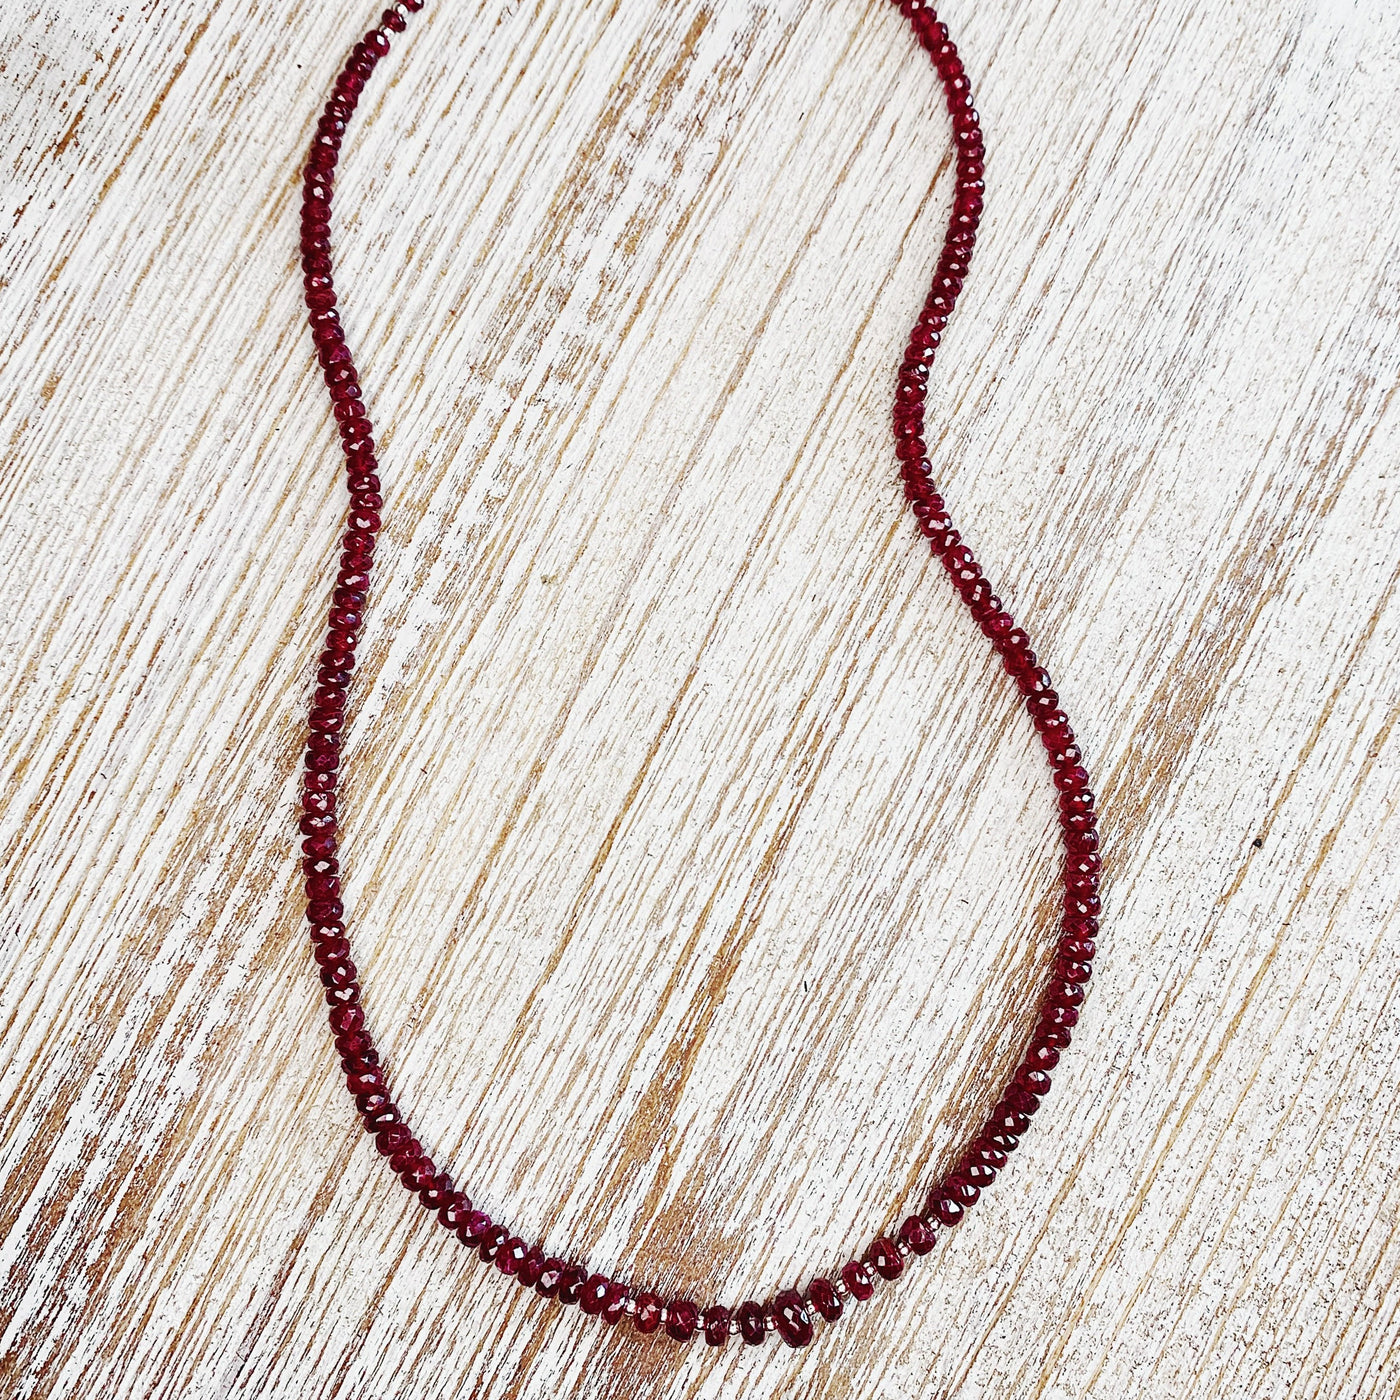 Fearlessness Ruby Signature Necklace